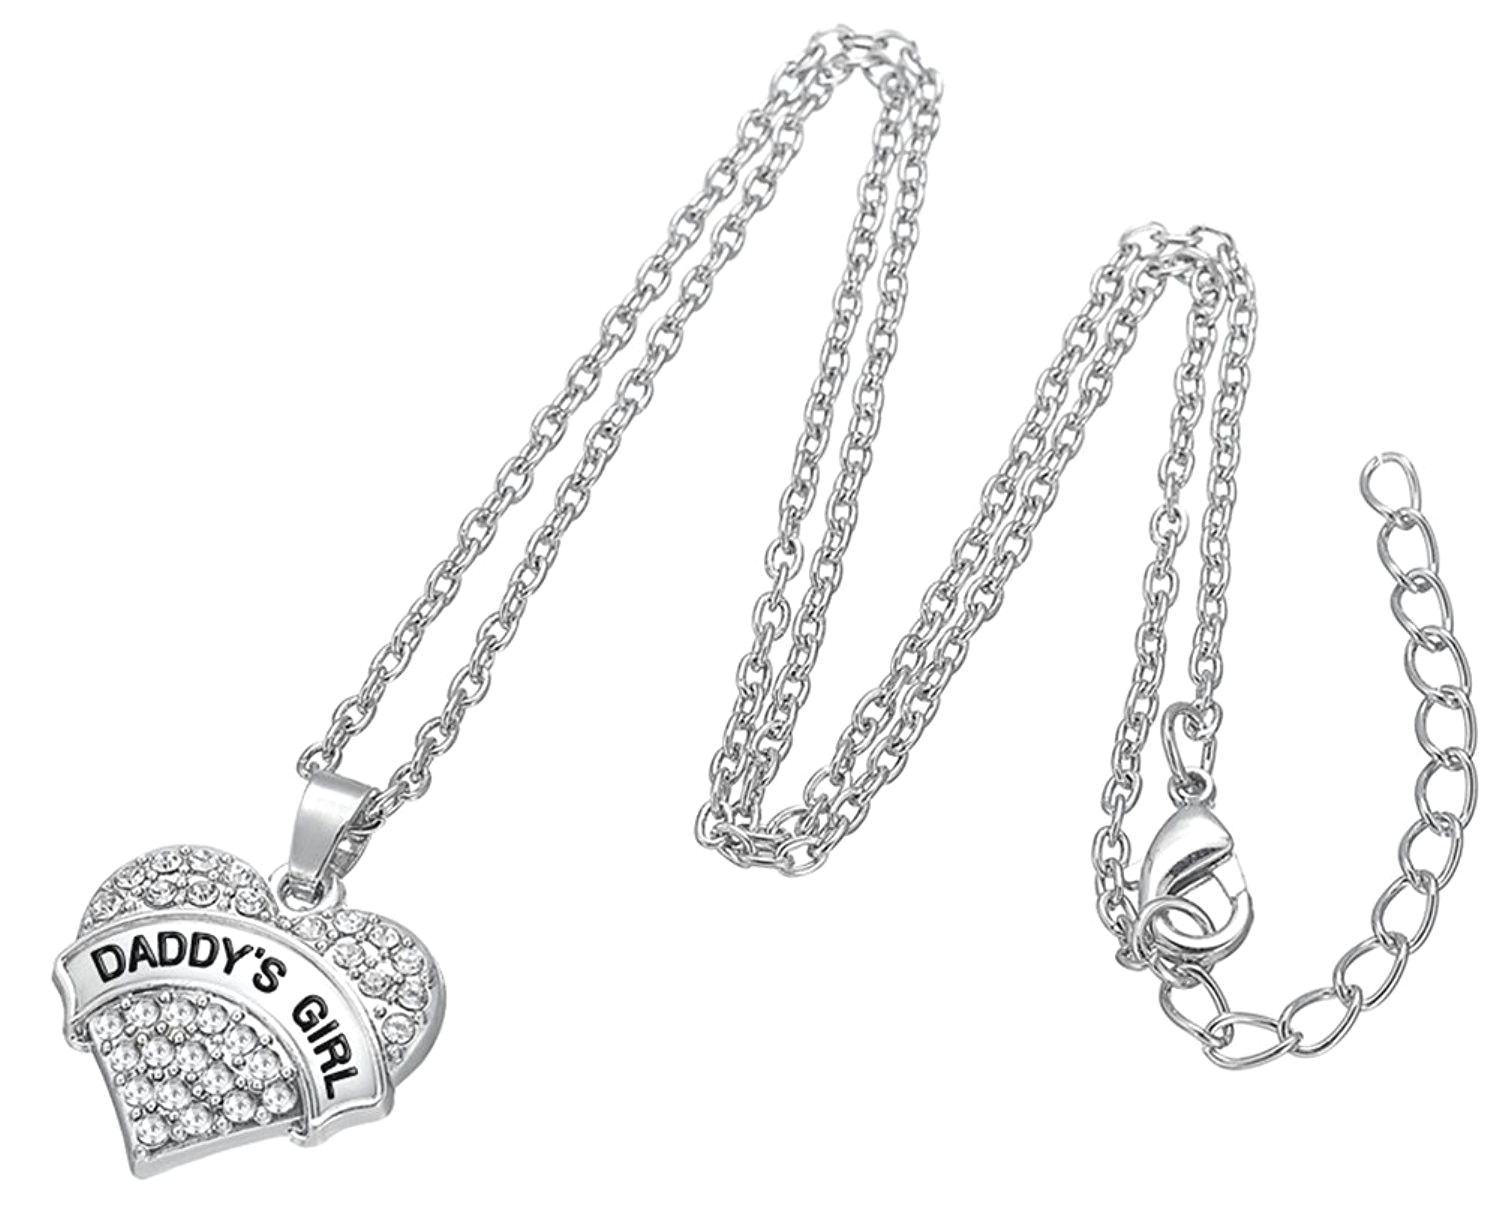 daddy s girl silver tone engraved heart necklace gift for daughters easter jewelry gifts clear ct12c37qykj necklaces pendants style necklaces